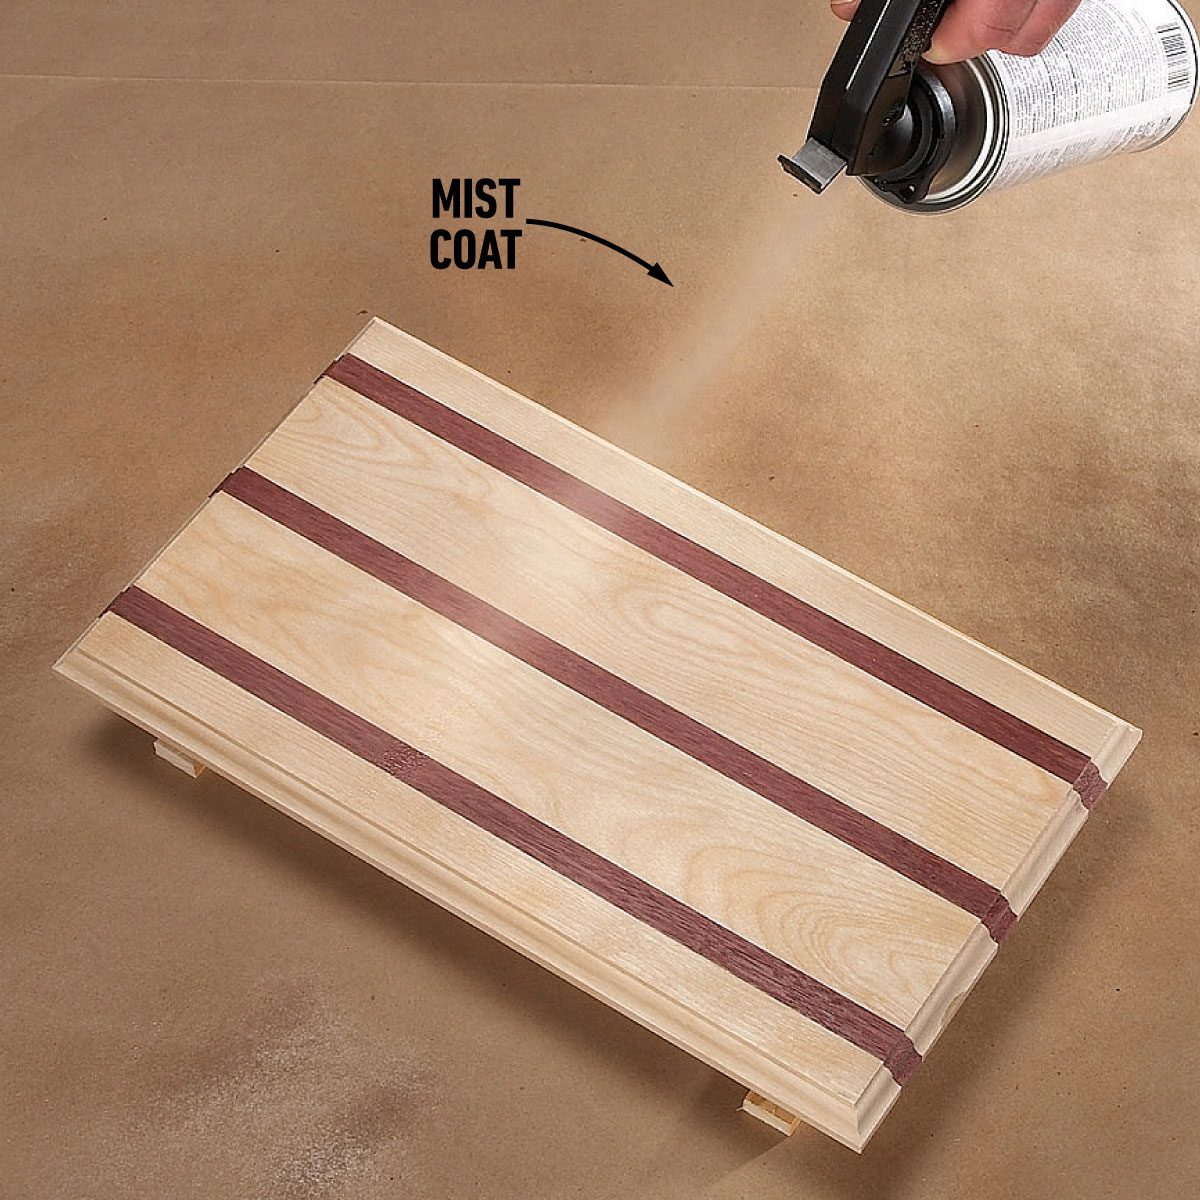 9 Tips For Spraying Varnish On Wood Seal Dark Stains And Exotic Wood With A Mist Coat